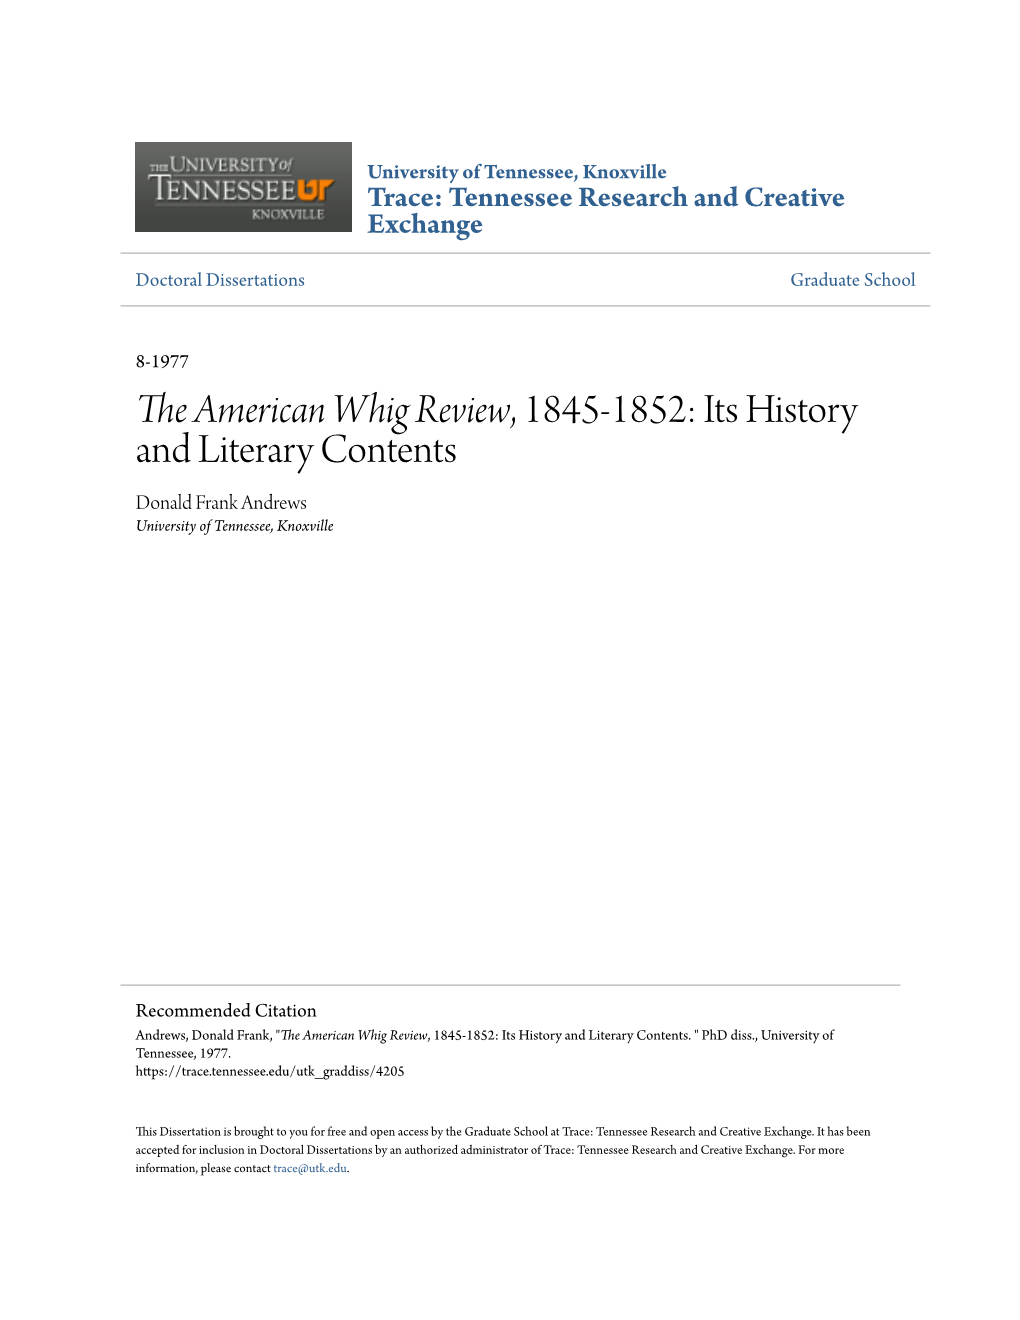 The American Whig Review, 1845-1852: Its History and Literary Contents Donald Frank Andrews University of Tennessee, Knoxville